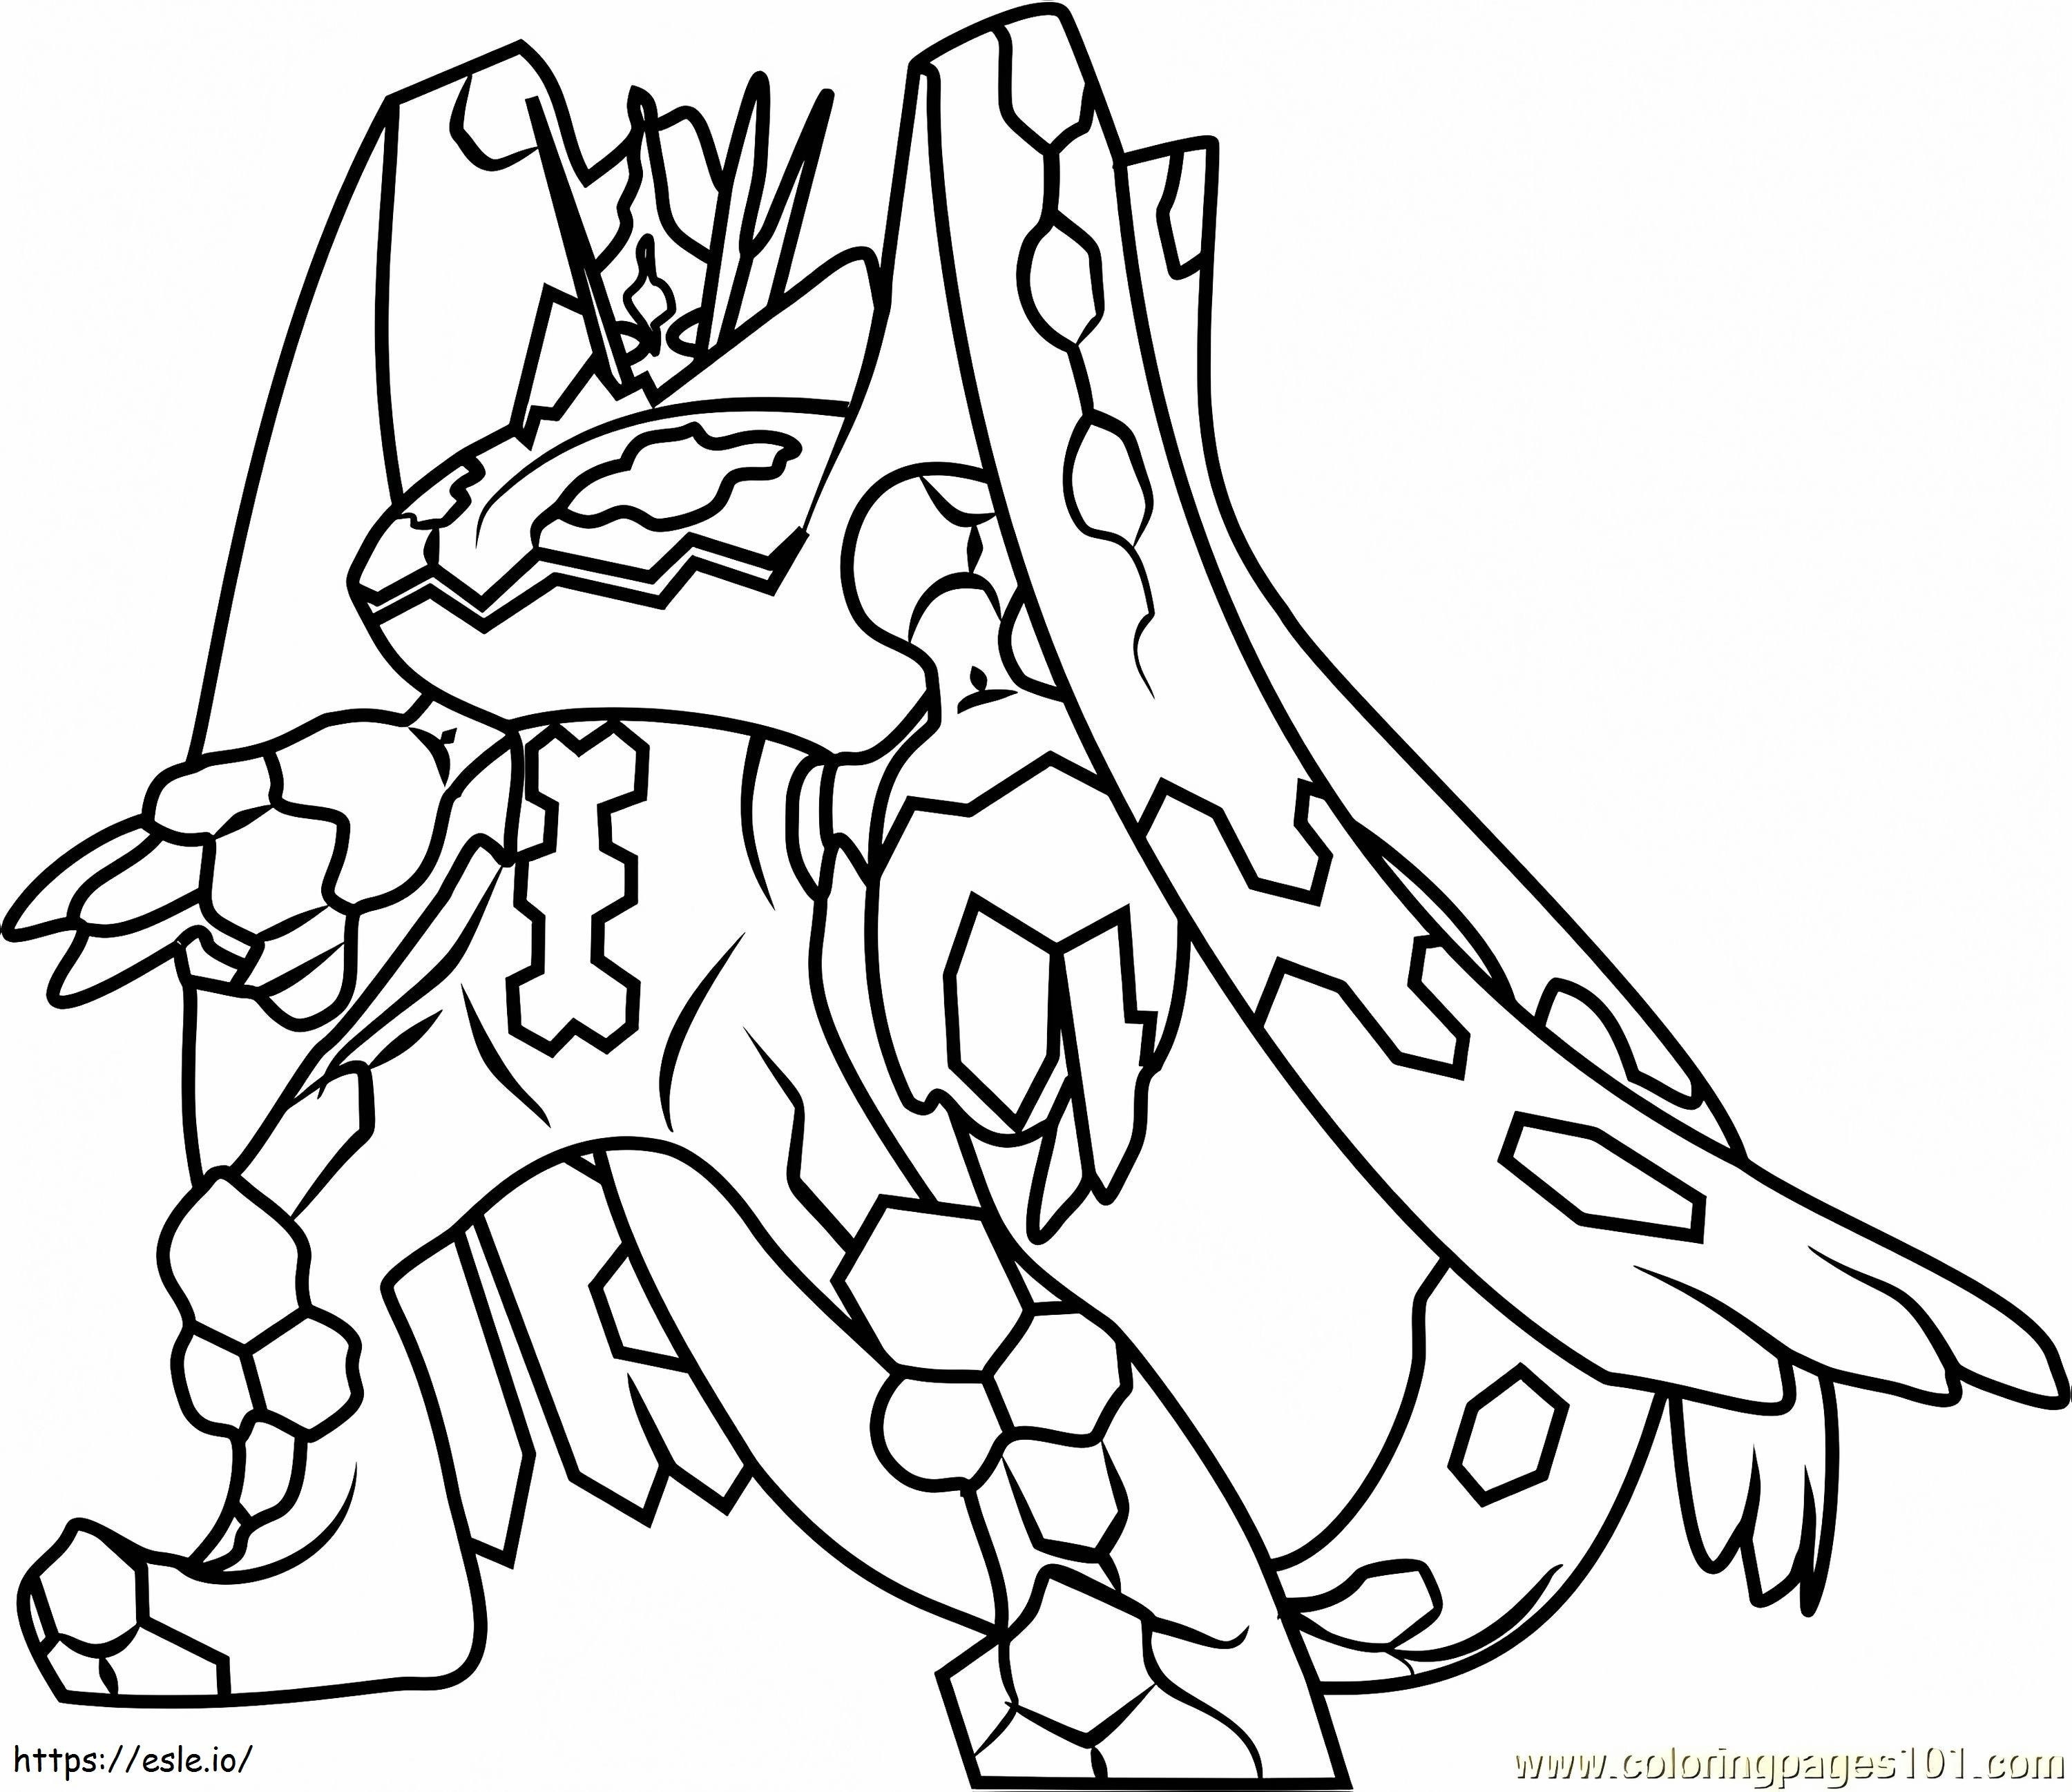 Zygarde Complete Forme A4 coloring page